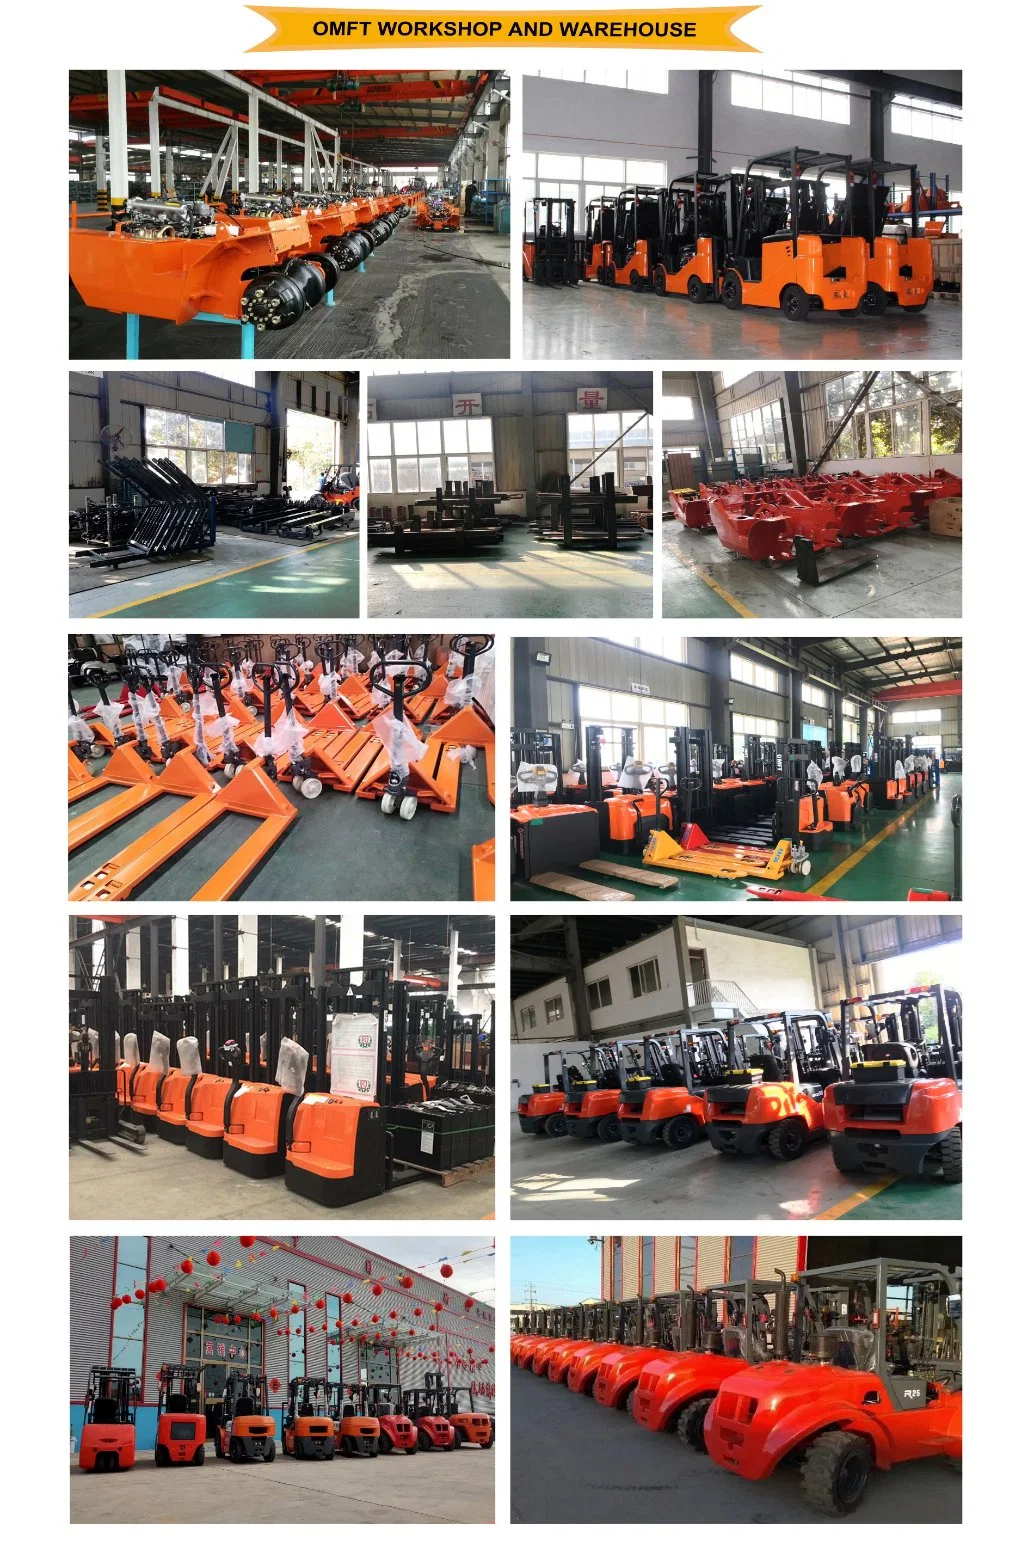 2.0 T 2000kg Pollution-Free Standing Type Electric Power Pallet Stacker Full Electric Pallet Stacker 2ton Suitable for Food Industry